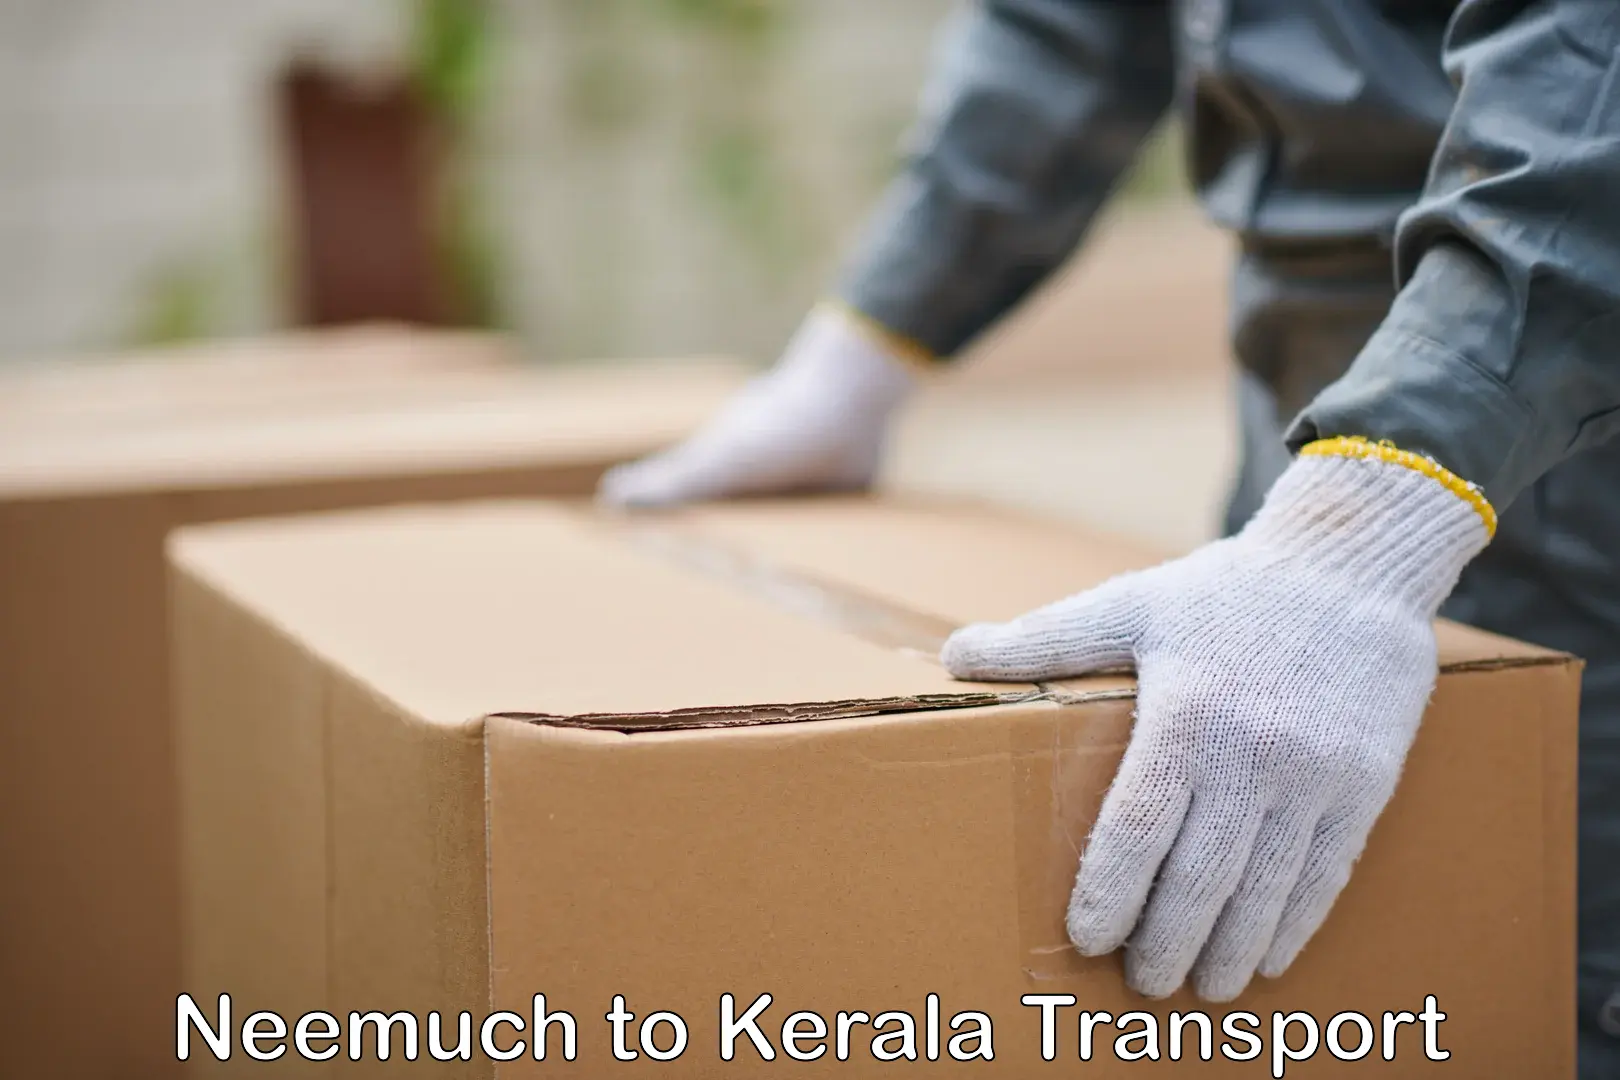 Cycle transportation service Neemuch to Kerala